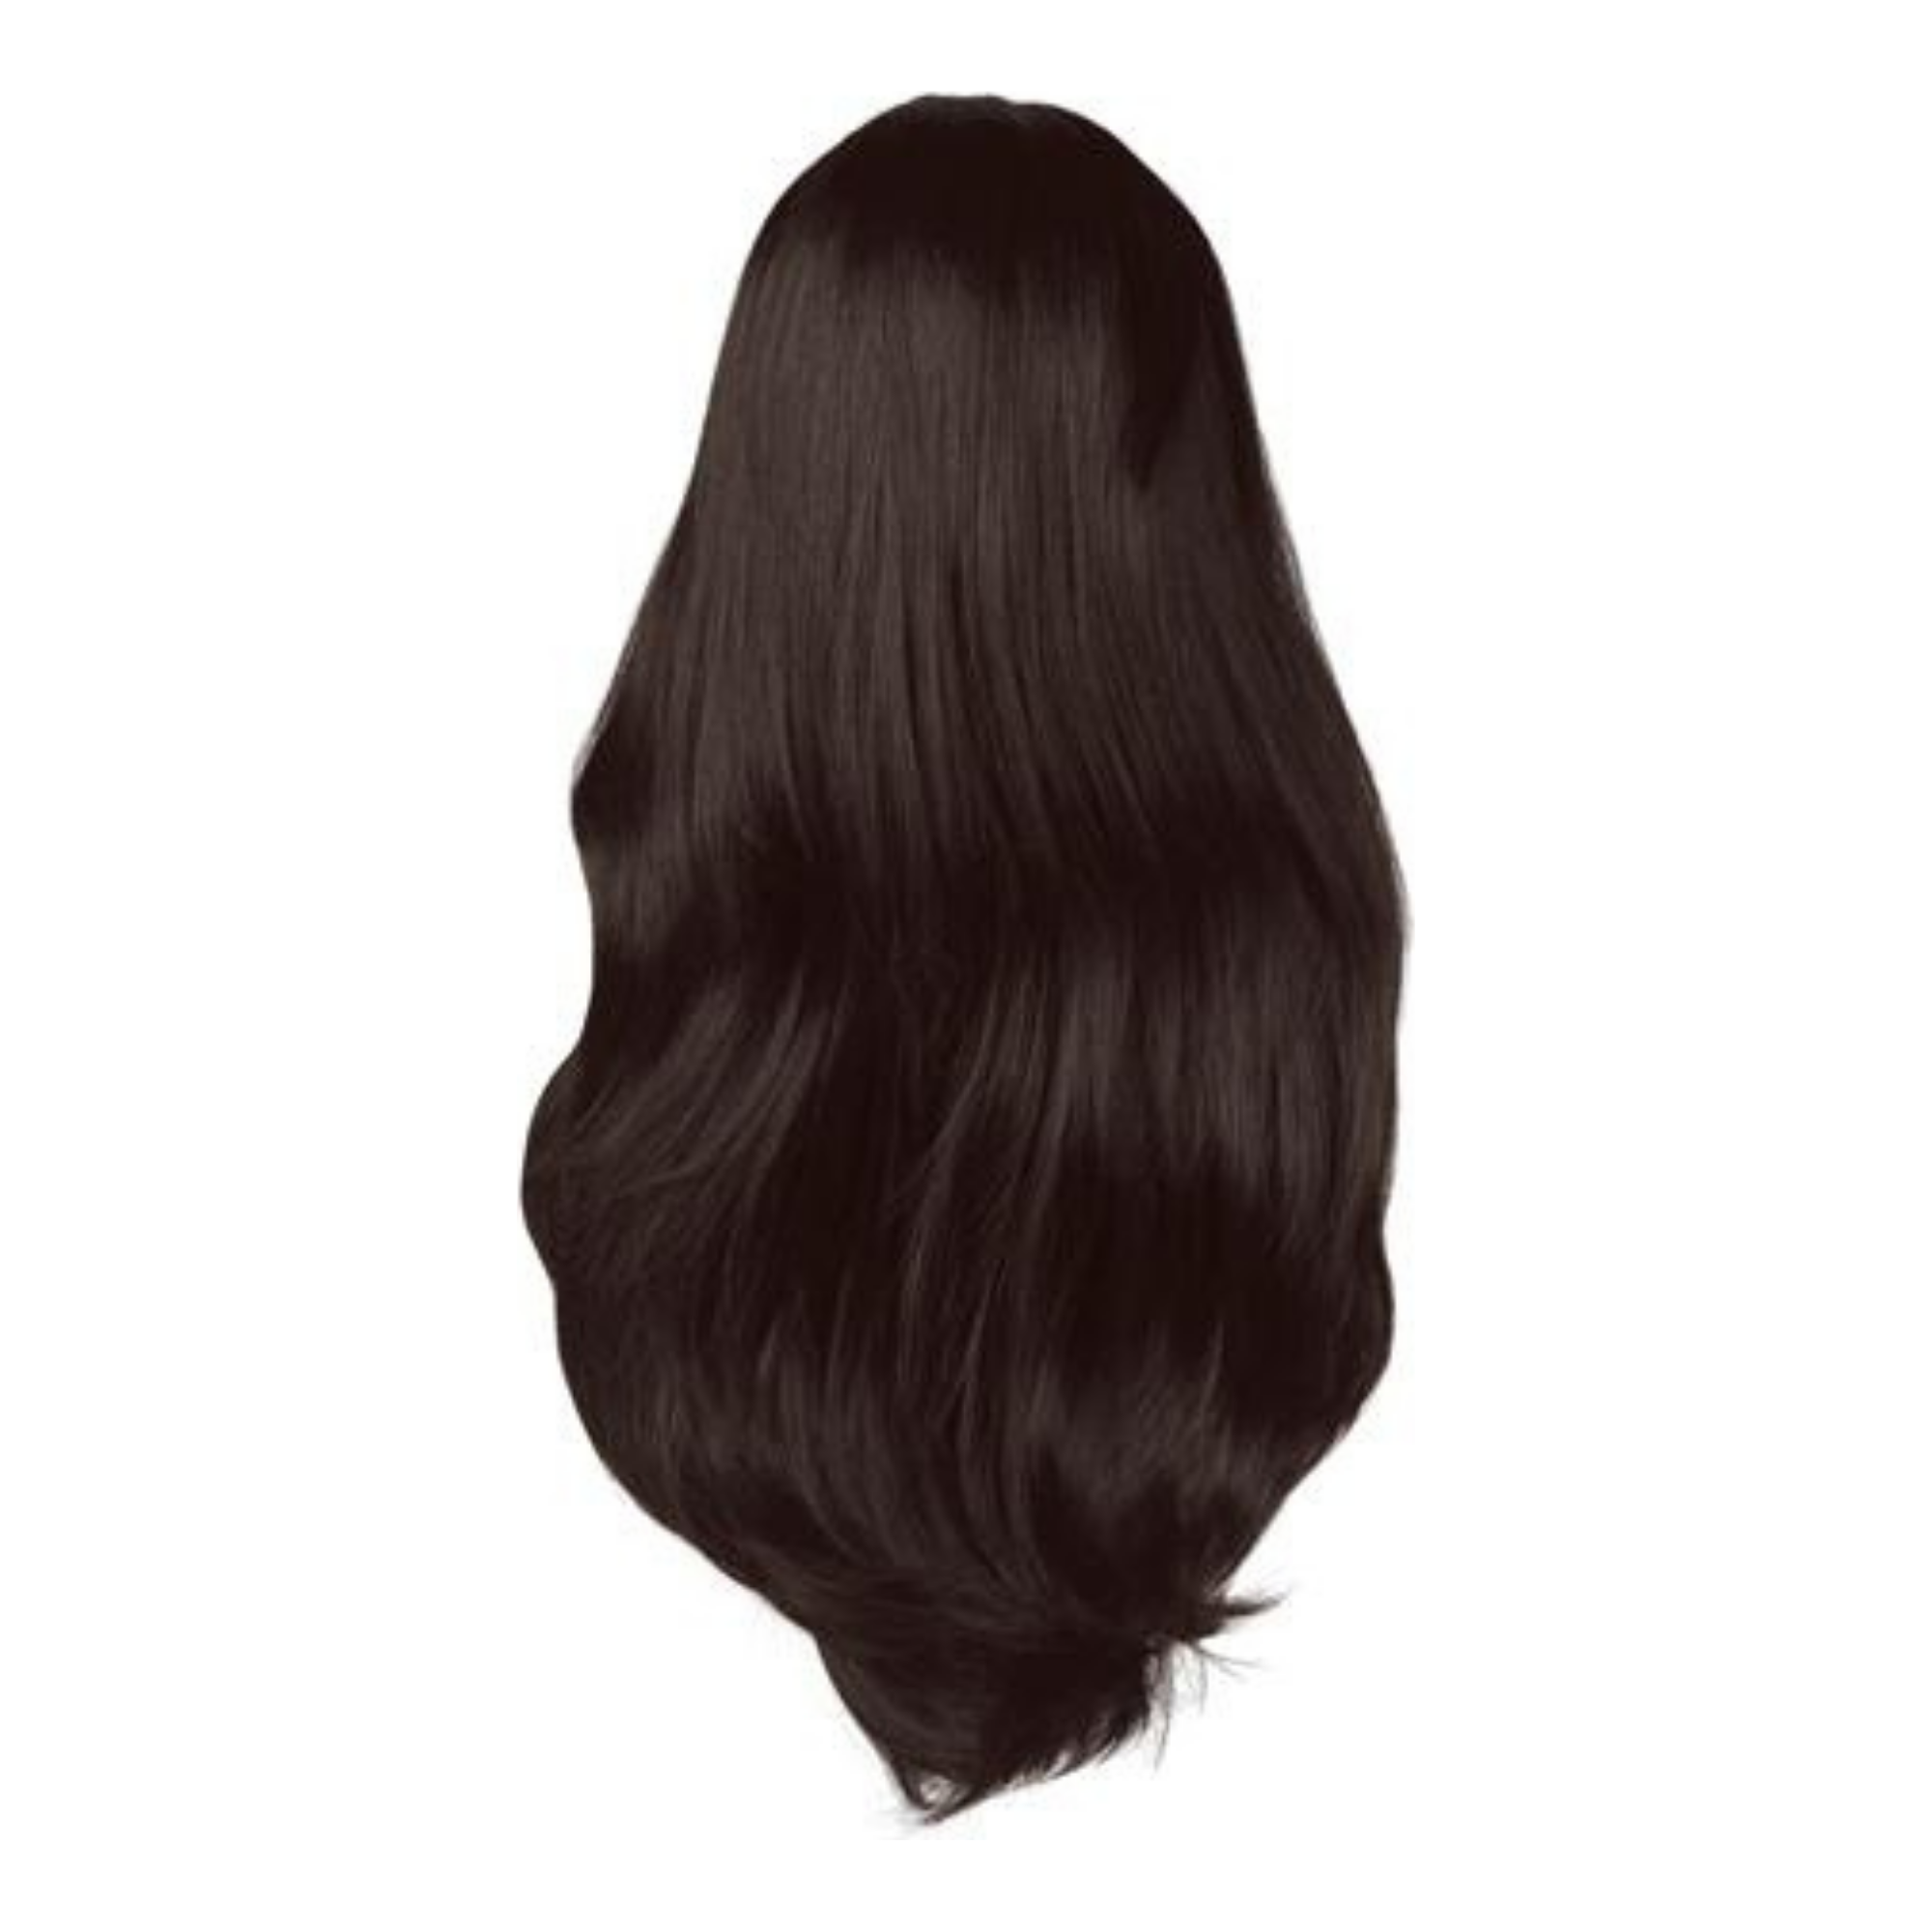 image of hair rehab london half wig hairpiece in shade midnight